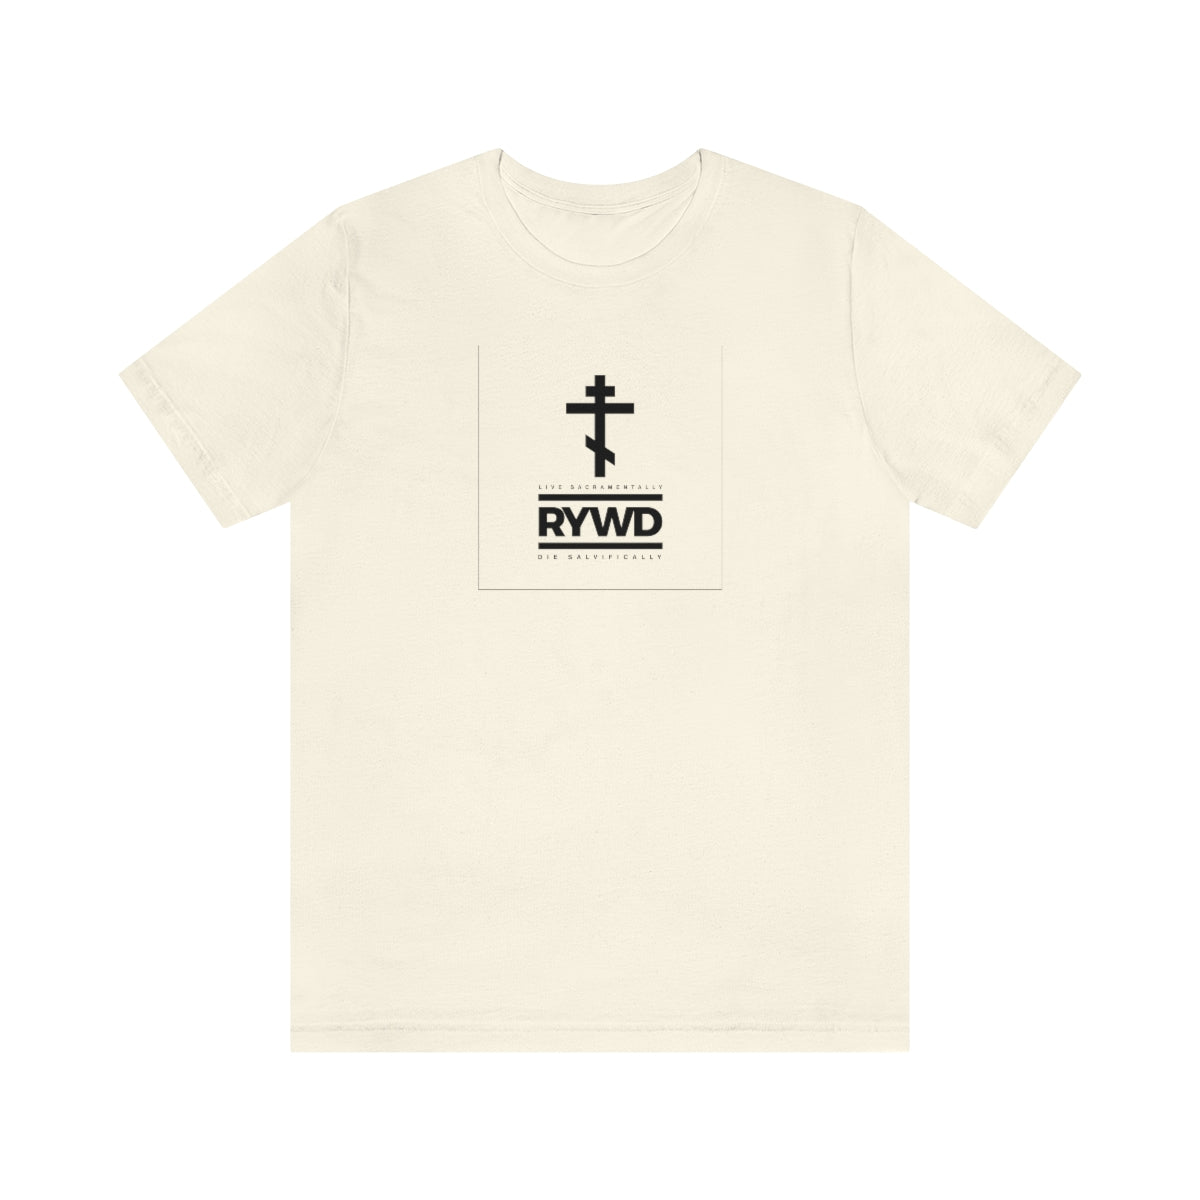 RYWD (Remember You Will Die) (Black Text) Logo Design No. 1 | Orthodox Christian T-Shirt